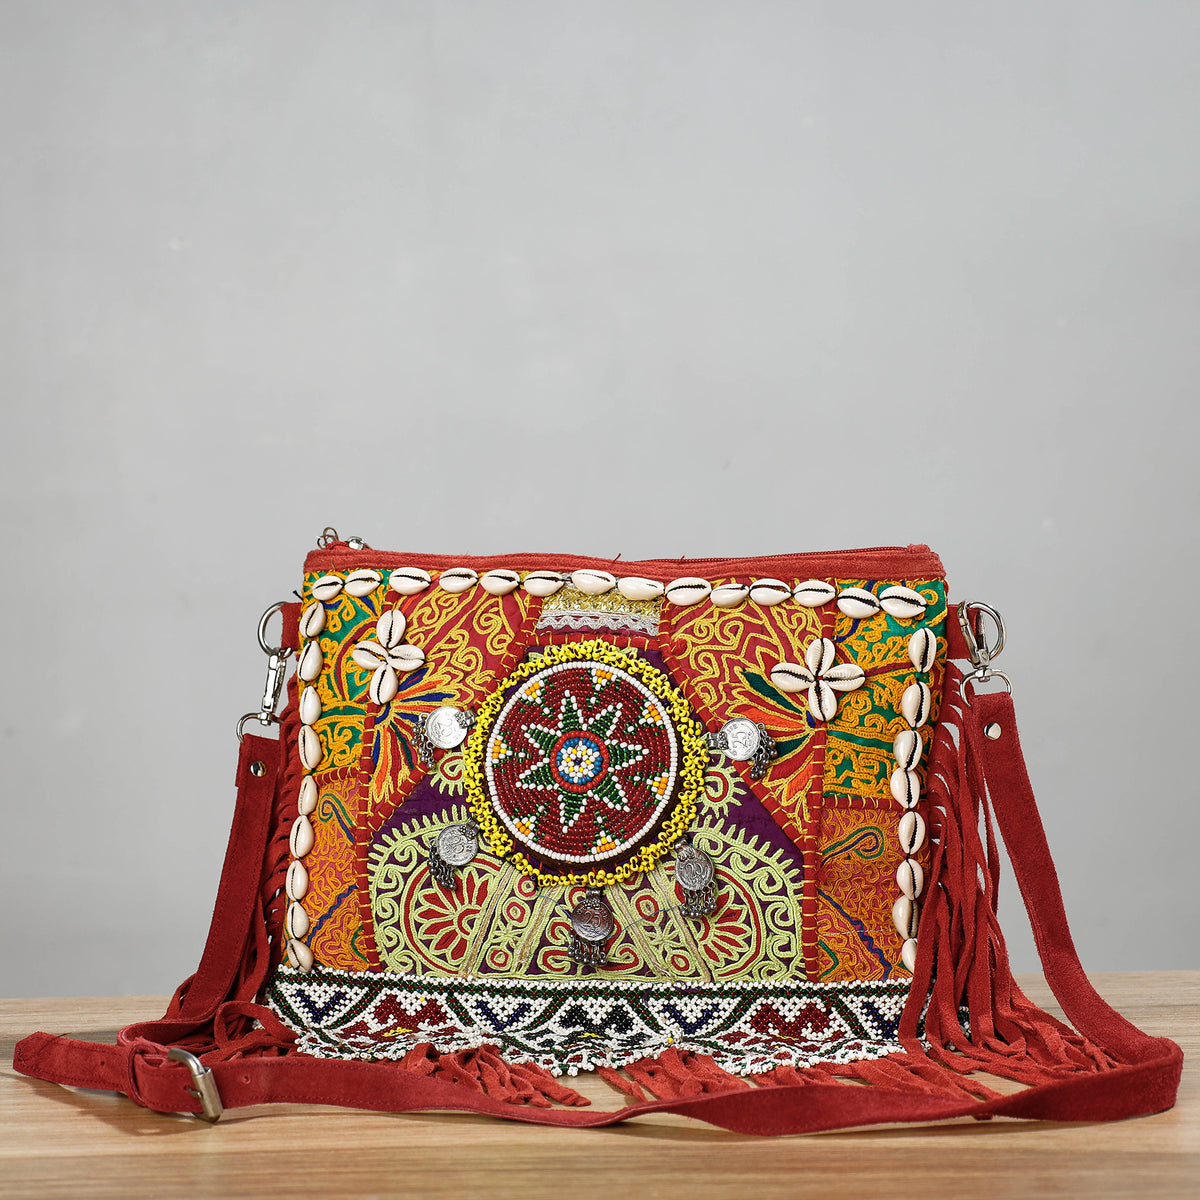 Banjara Vintage Embroidery Beads, Shell &amp; Coin Patchwork Sling Bag